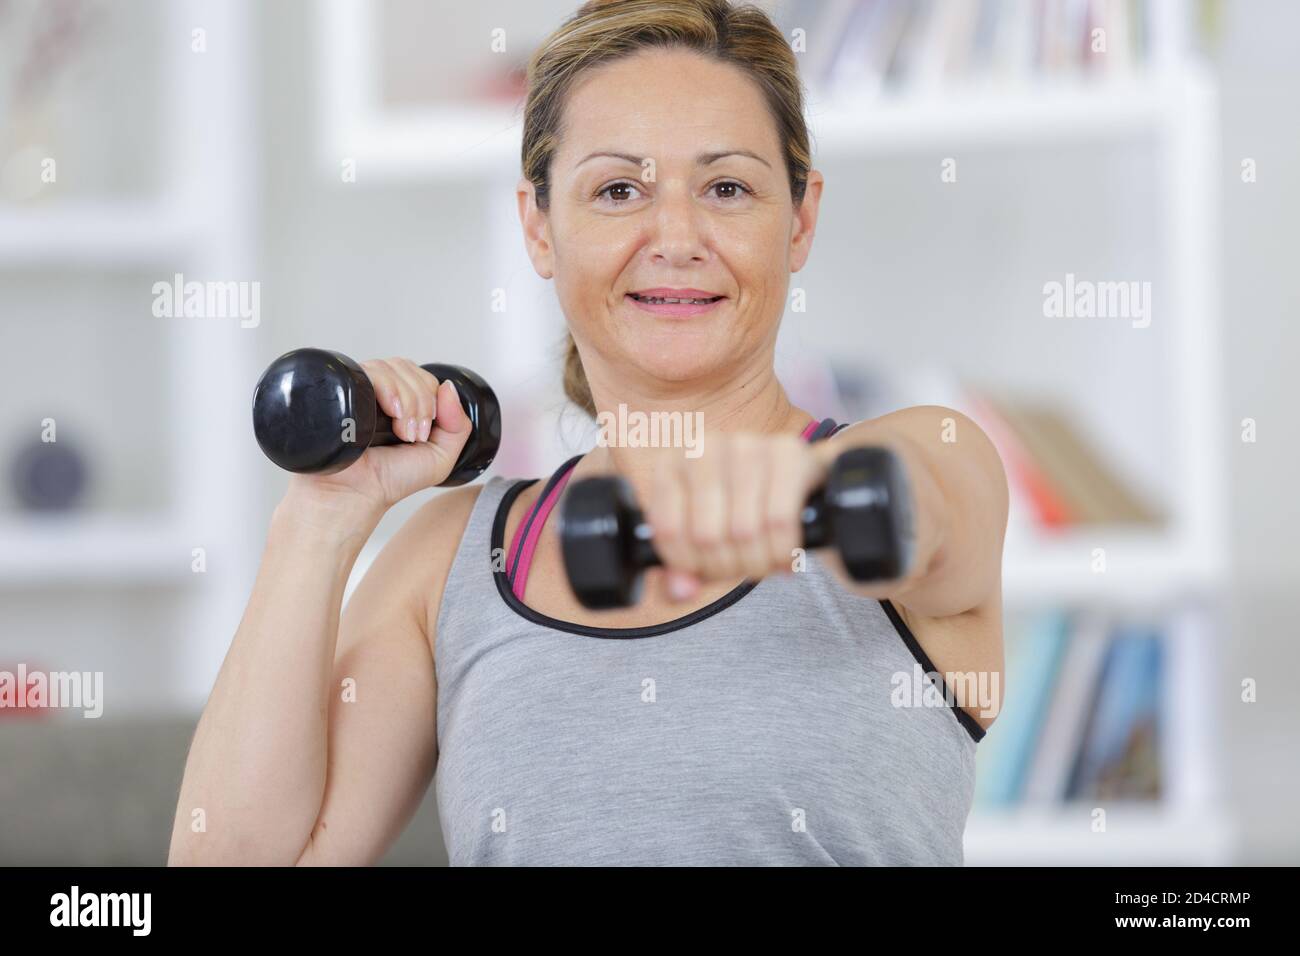 woman working out at home with dumbbell Stock Photo